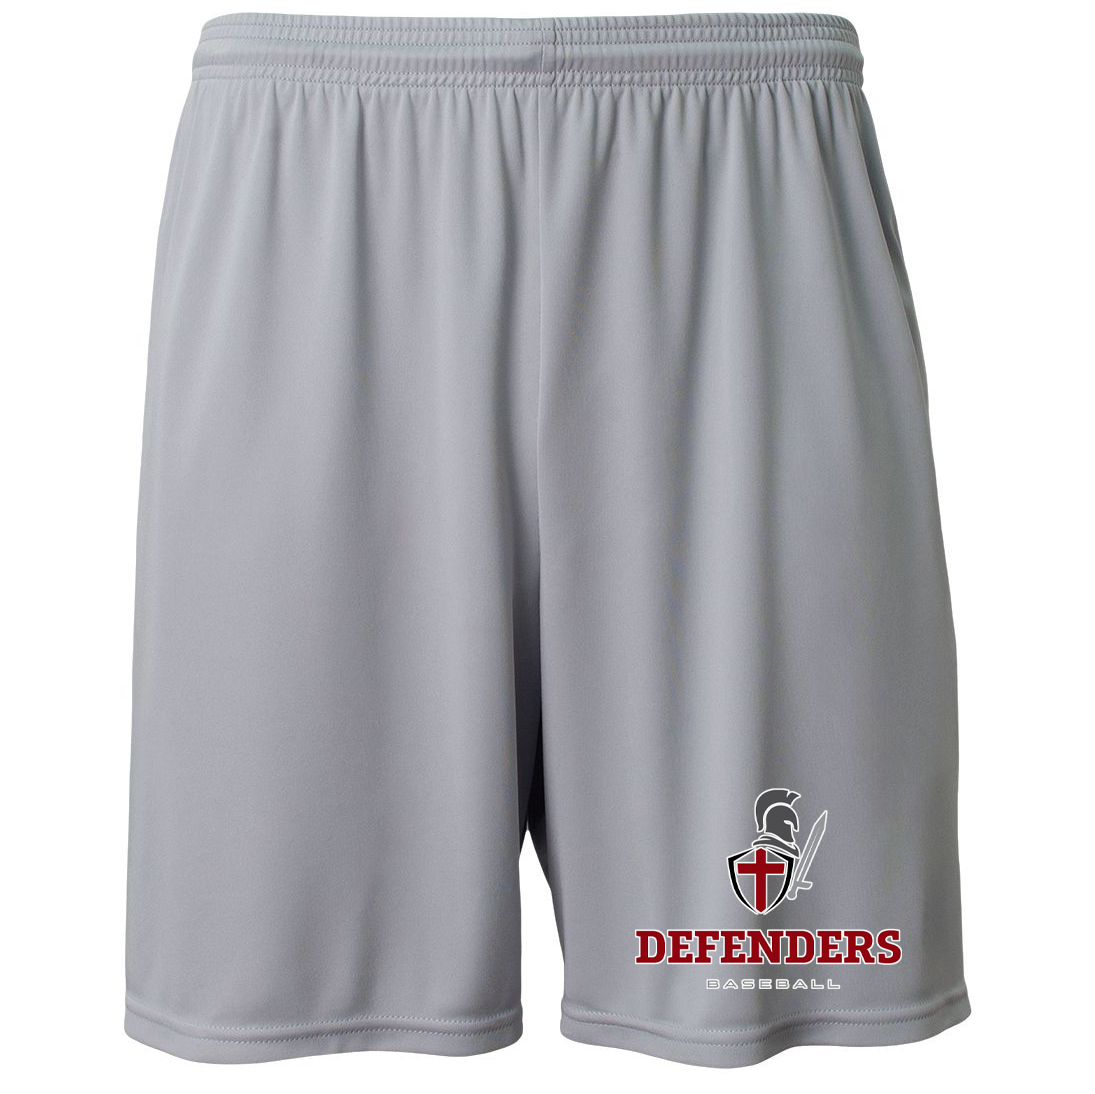 Defenders Baseball Cooling Short with Pockets